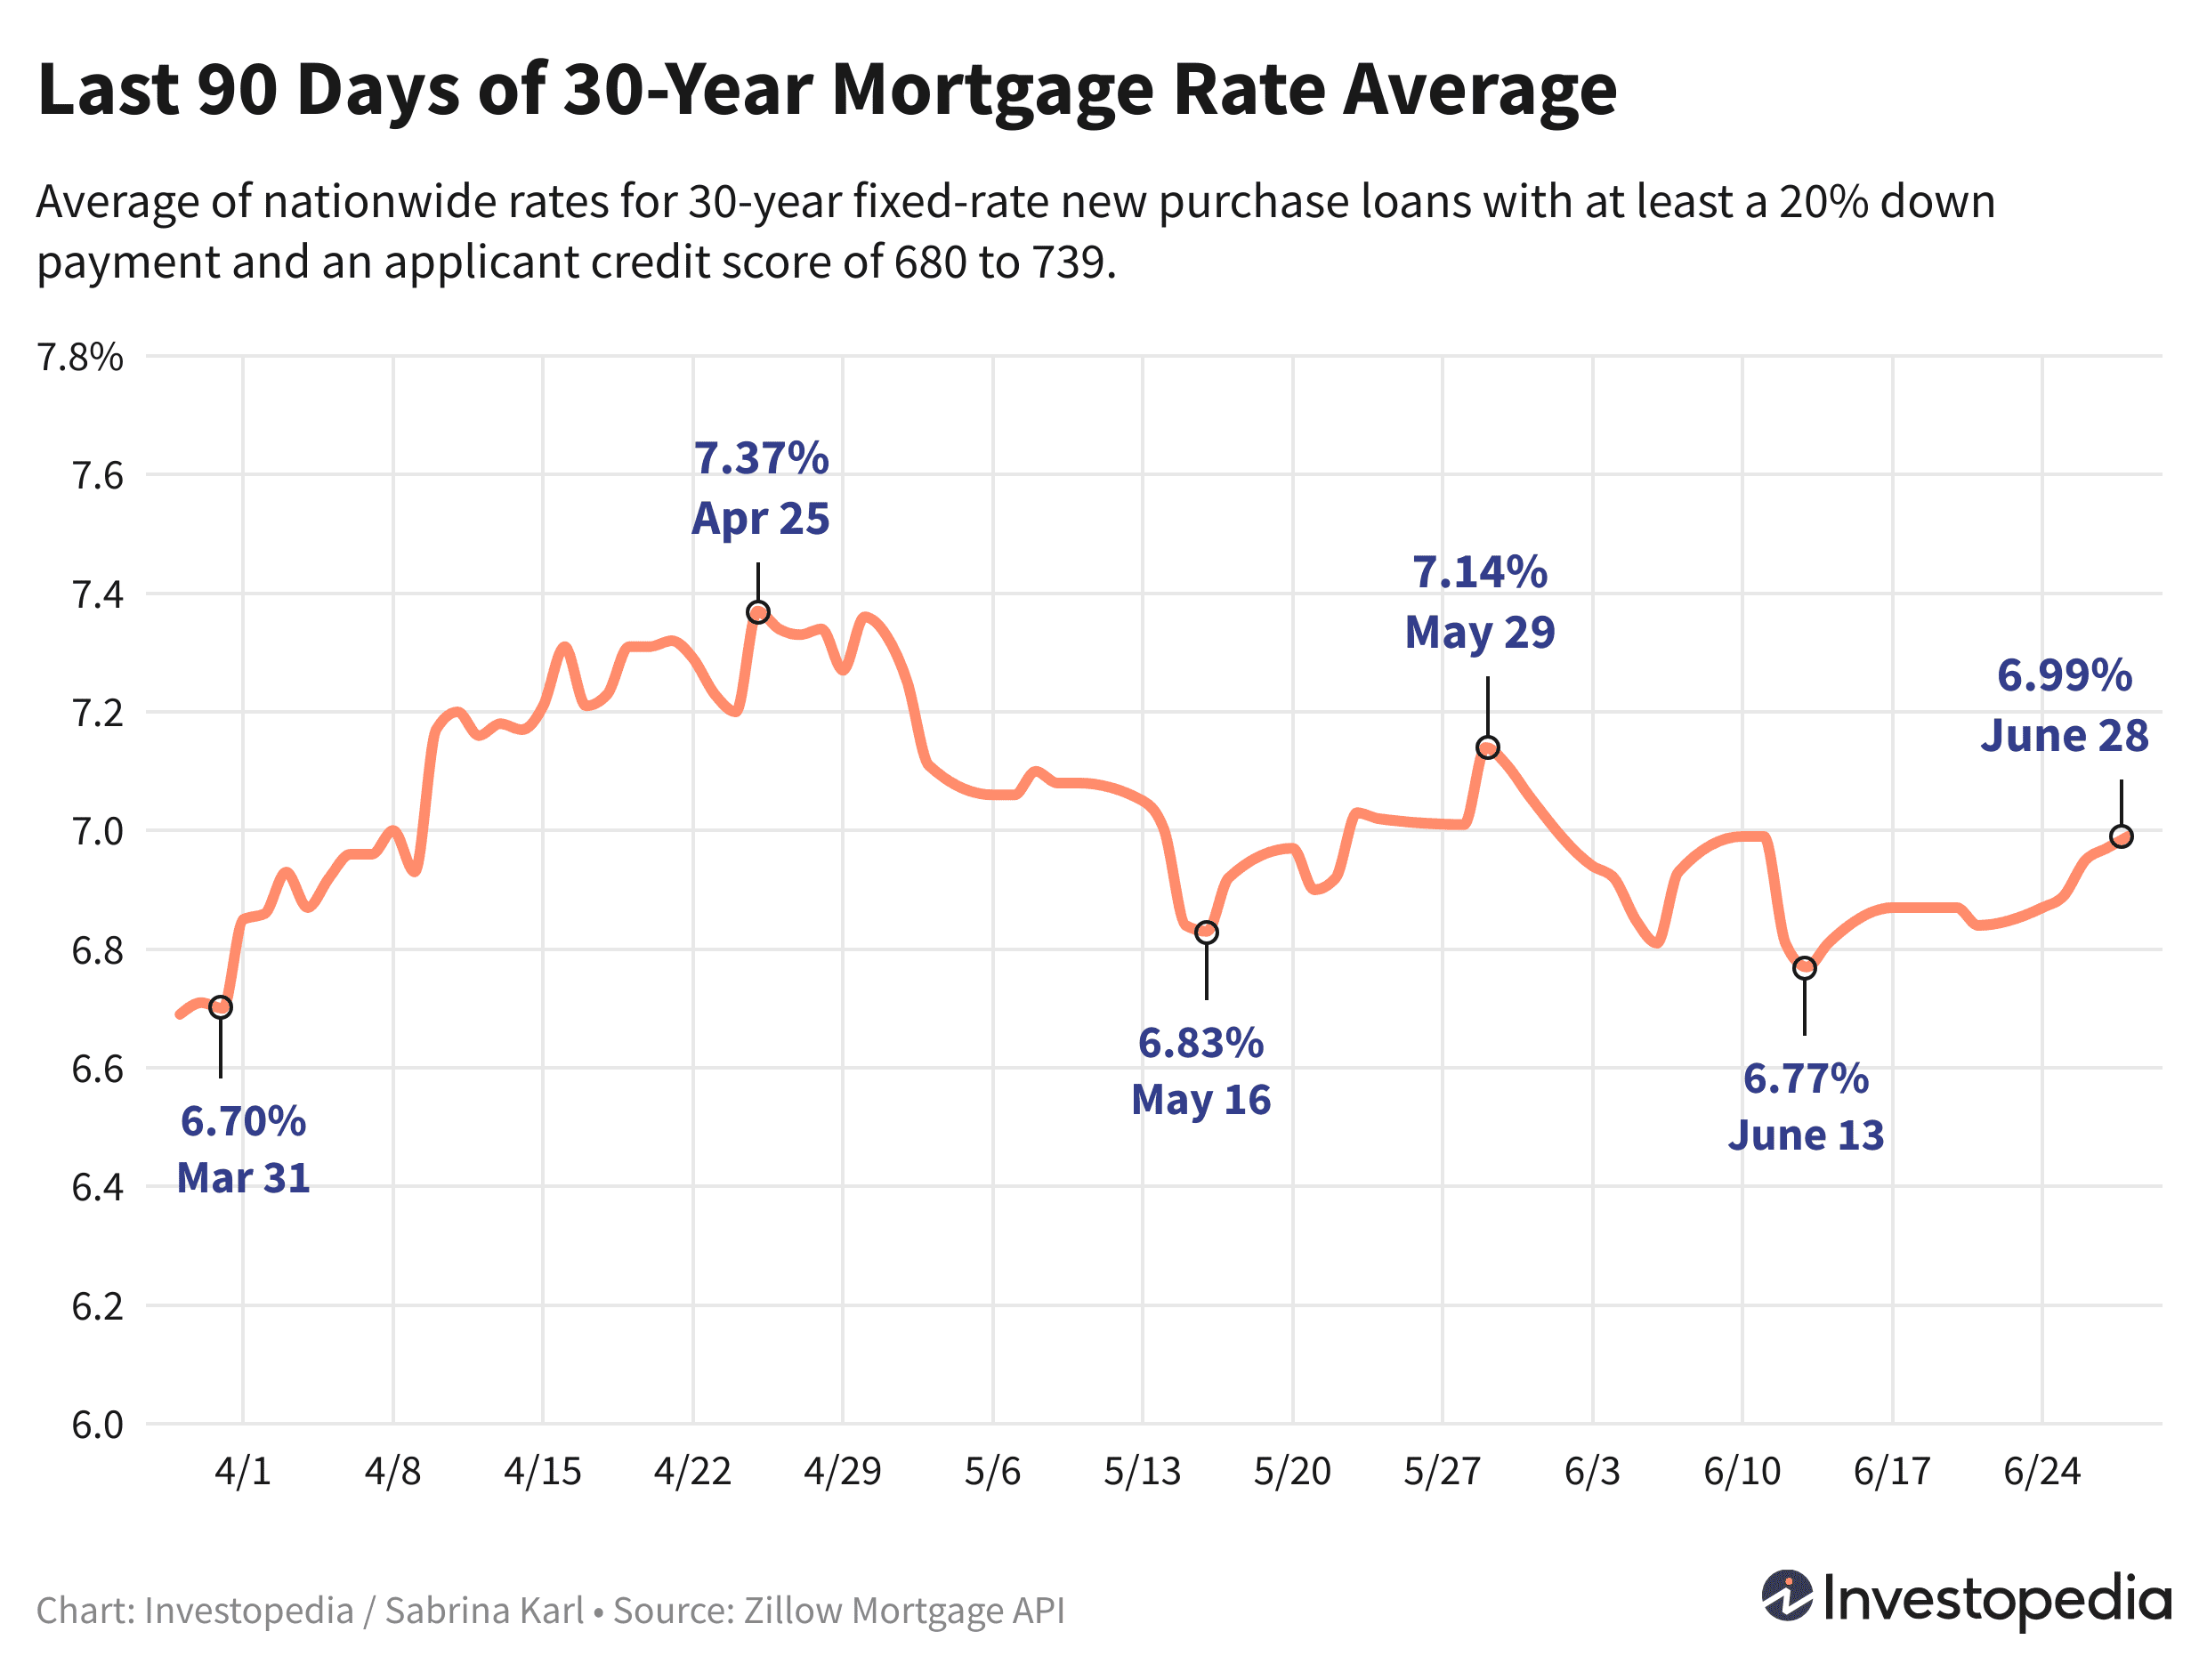 Line graph showing the last 90 days of the 30-year new purchase mortgage rate average - July 1, 2024